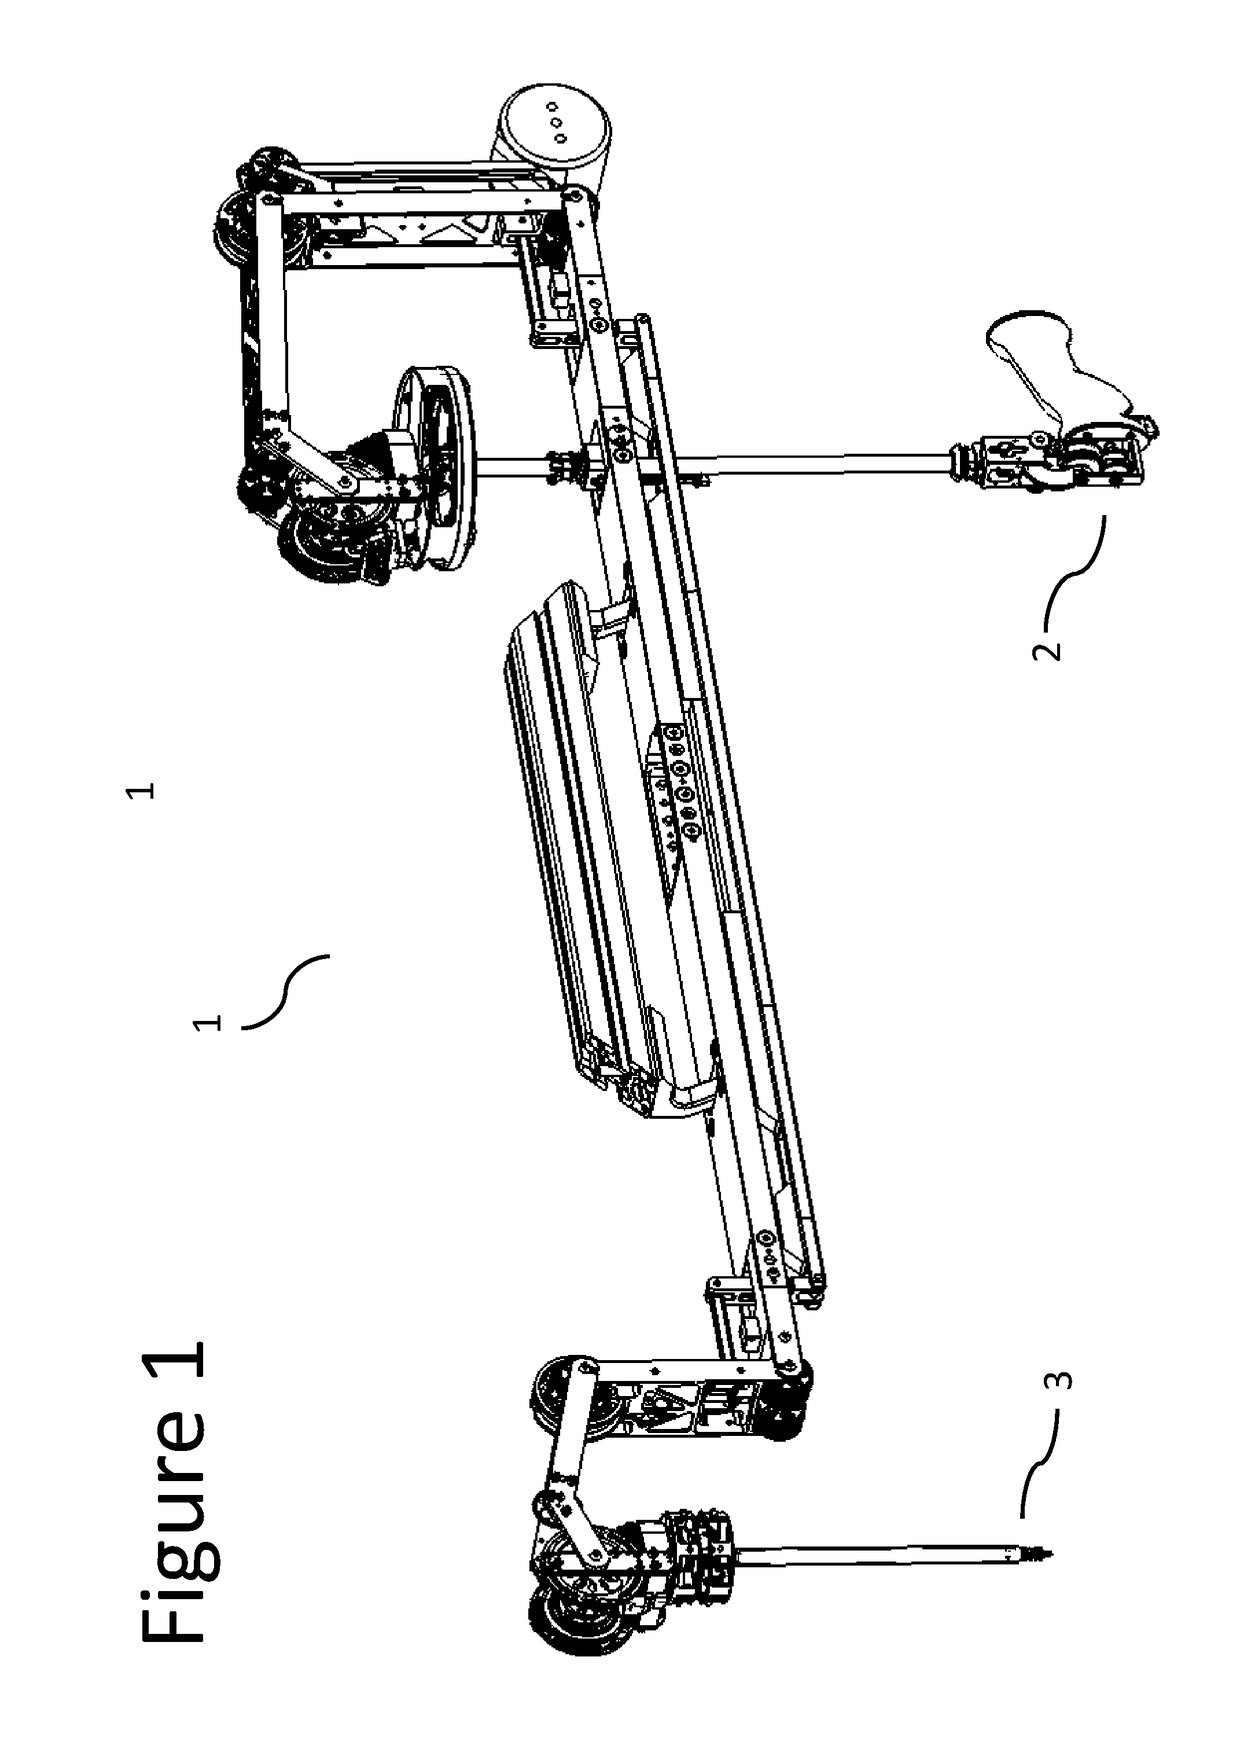 Mechanical teleoperated device for remote manipulation